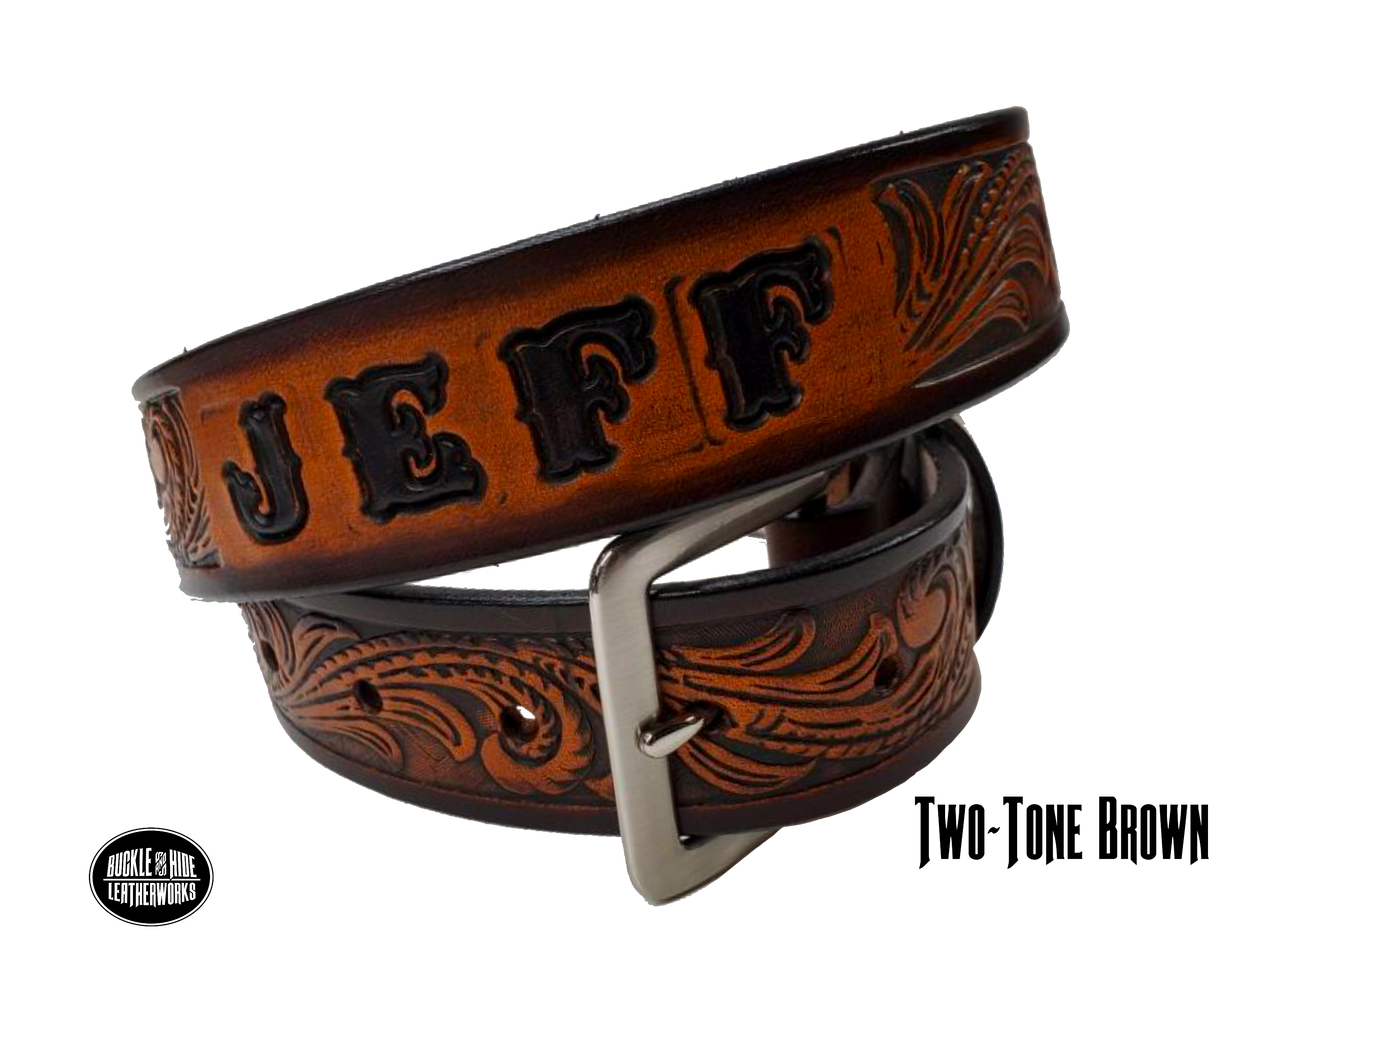 Full grain American vegetable tanned cowhide approx. 1/8"thick. Width 1 1/2" and includes Antique Nickle plated Solid Brass buckle Hand Finished in 3 color options Smooth burnished painted edges Choose with or without name, if without name, design will cover entire length of belt For name Type name desired on belt in "Type Name Here" section, no more than 8 letters maximum Buckle snaps in place for easy changing if desired Made in our Smyrna, TN, USA shop